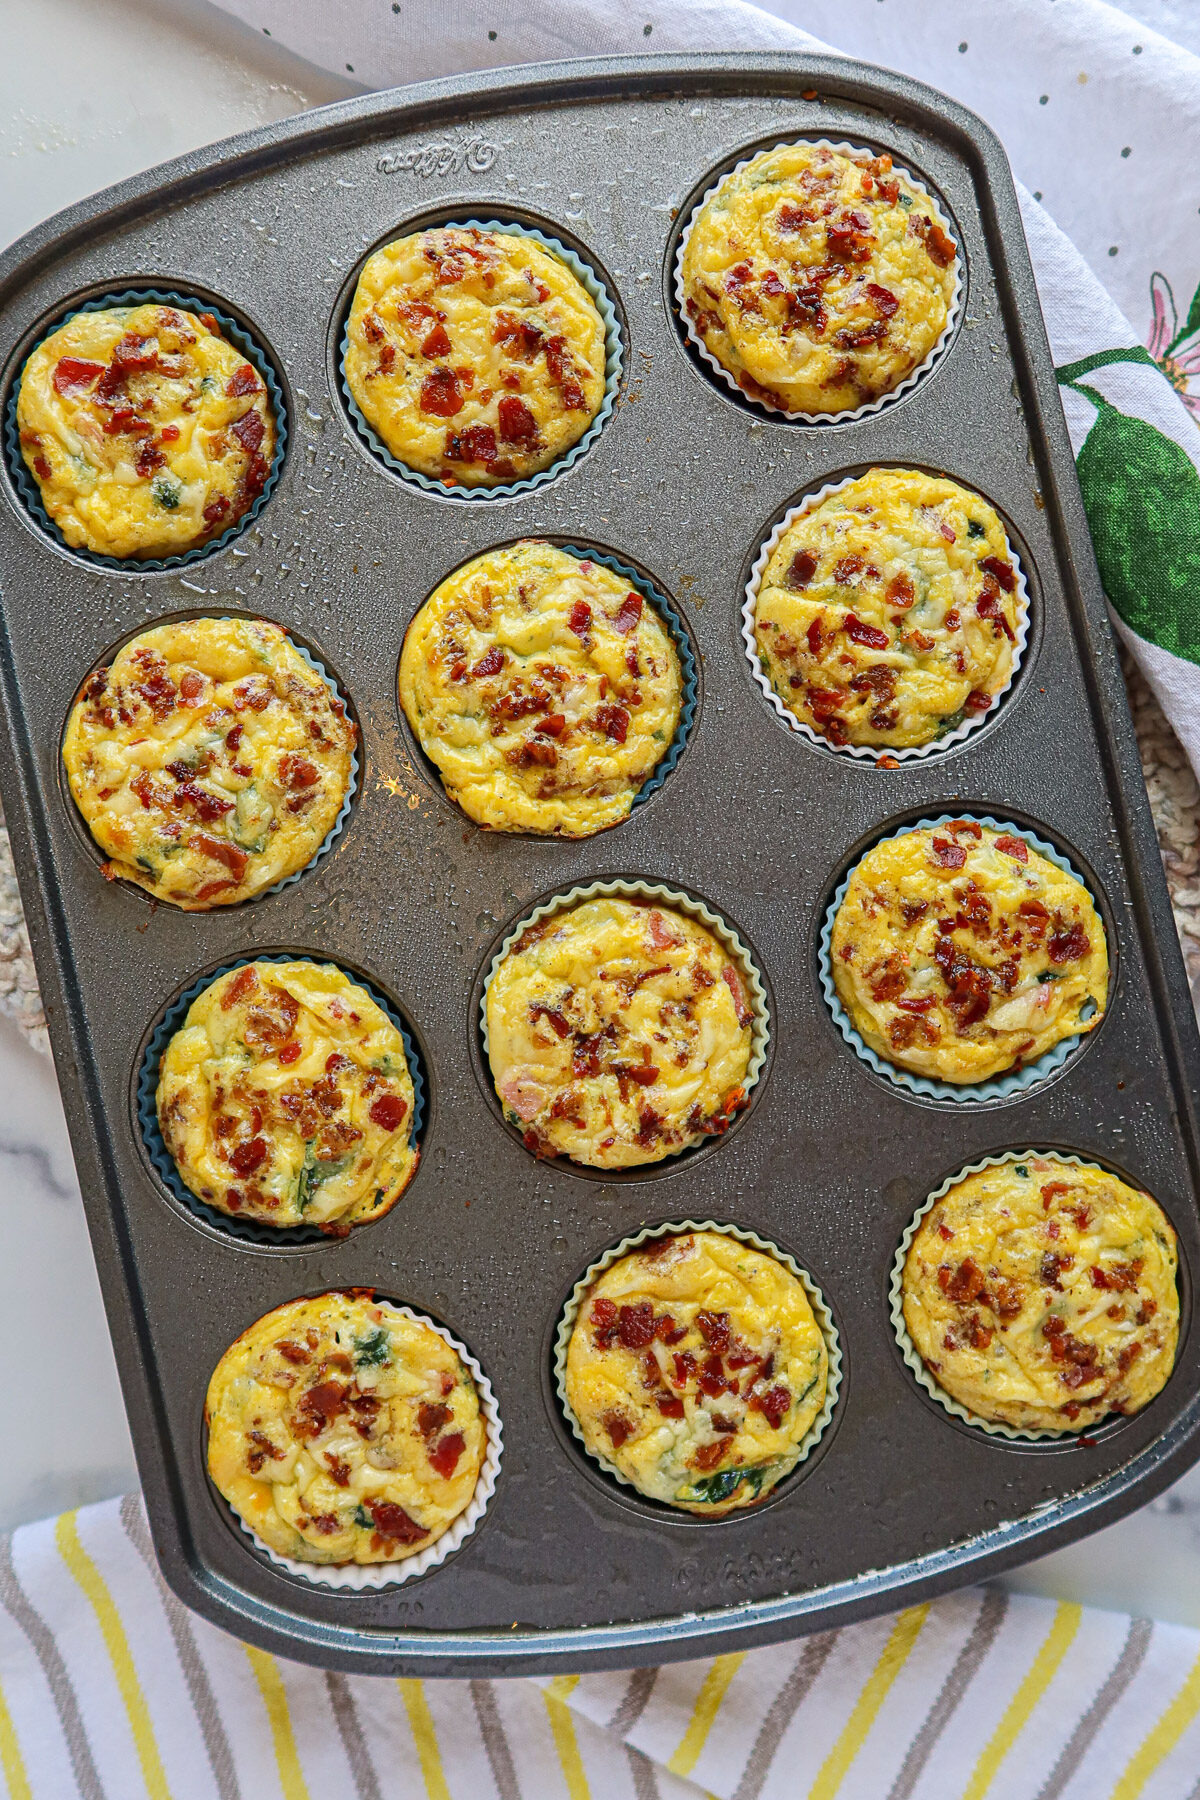 Baked quiche cups in a lined muffin pan.